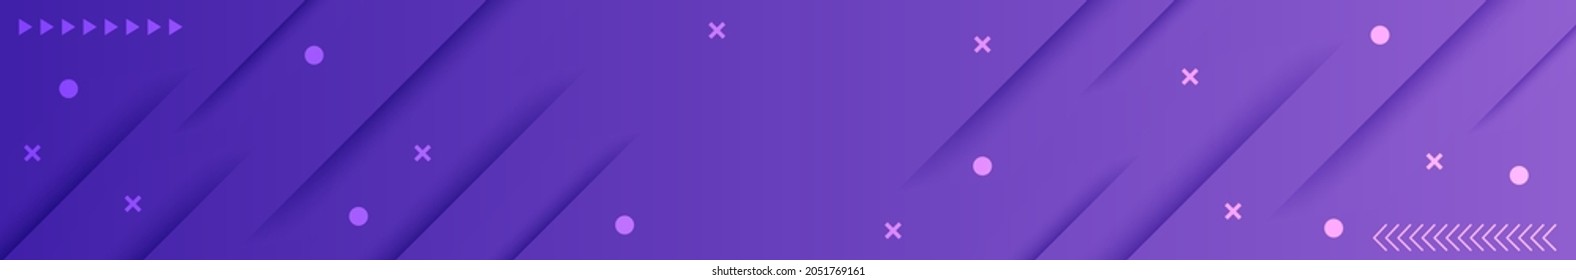 abstract  technology  effects  scratch  modern  colorful  blue iris  purple gradient wallpaper background vector illustration